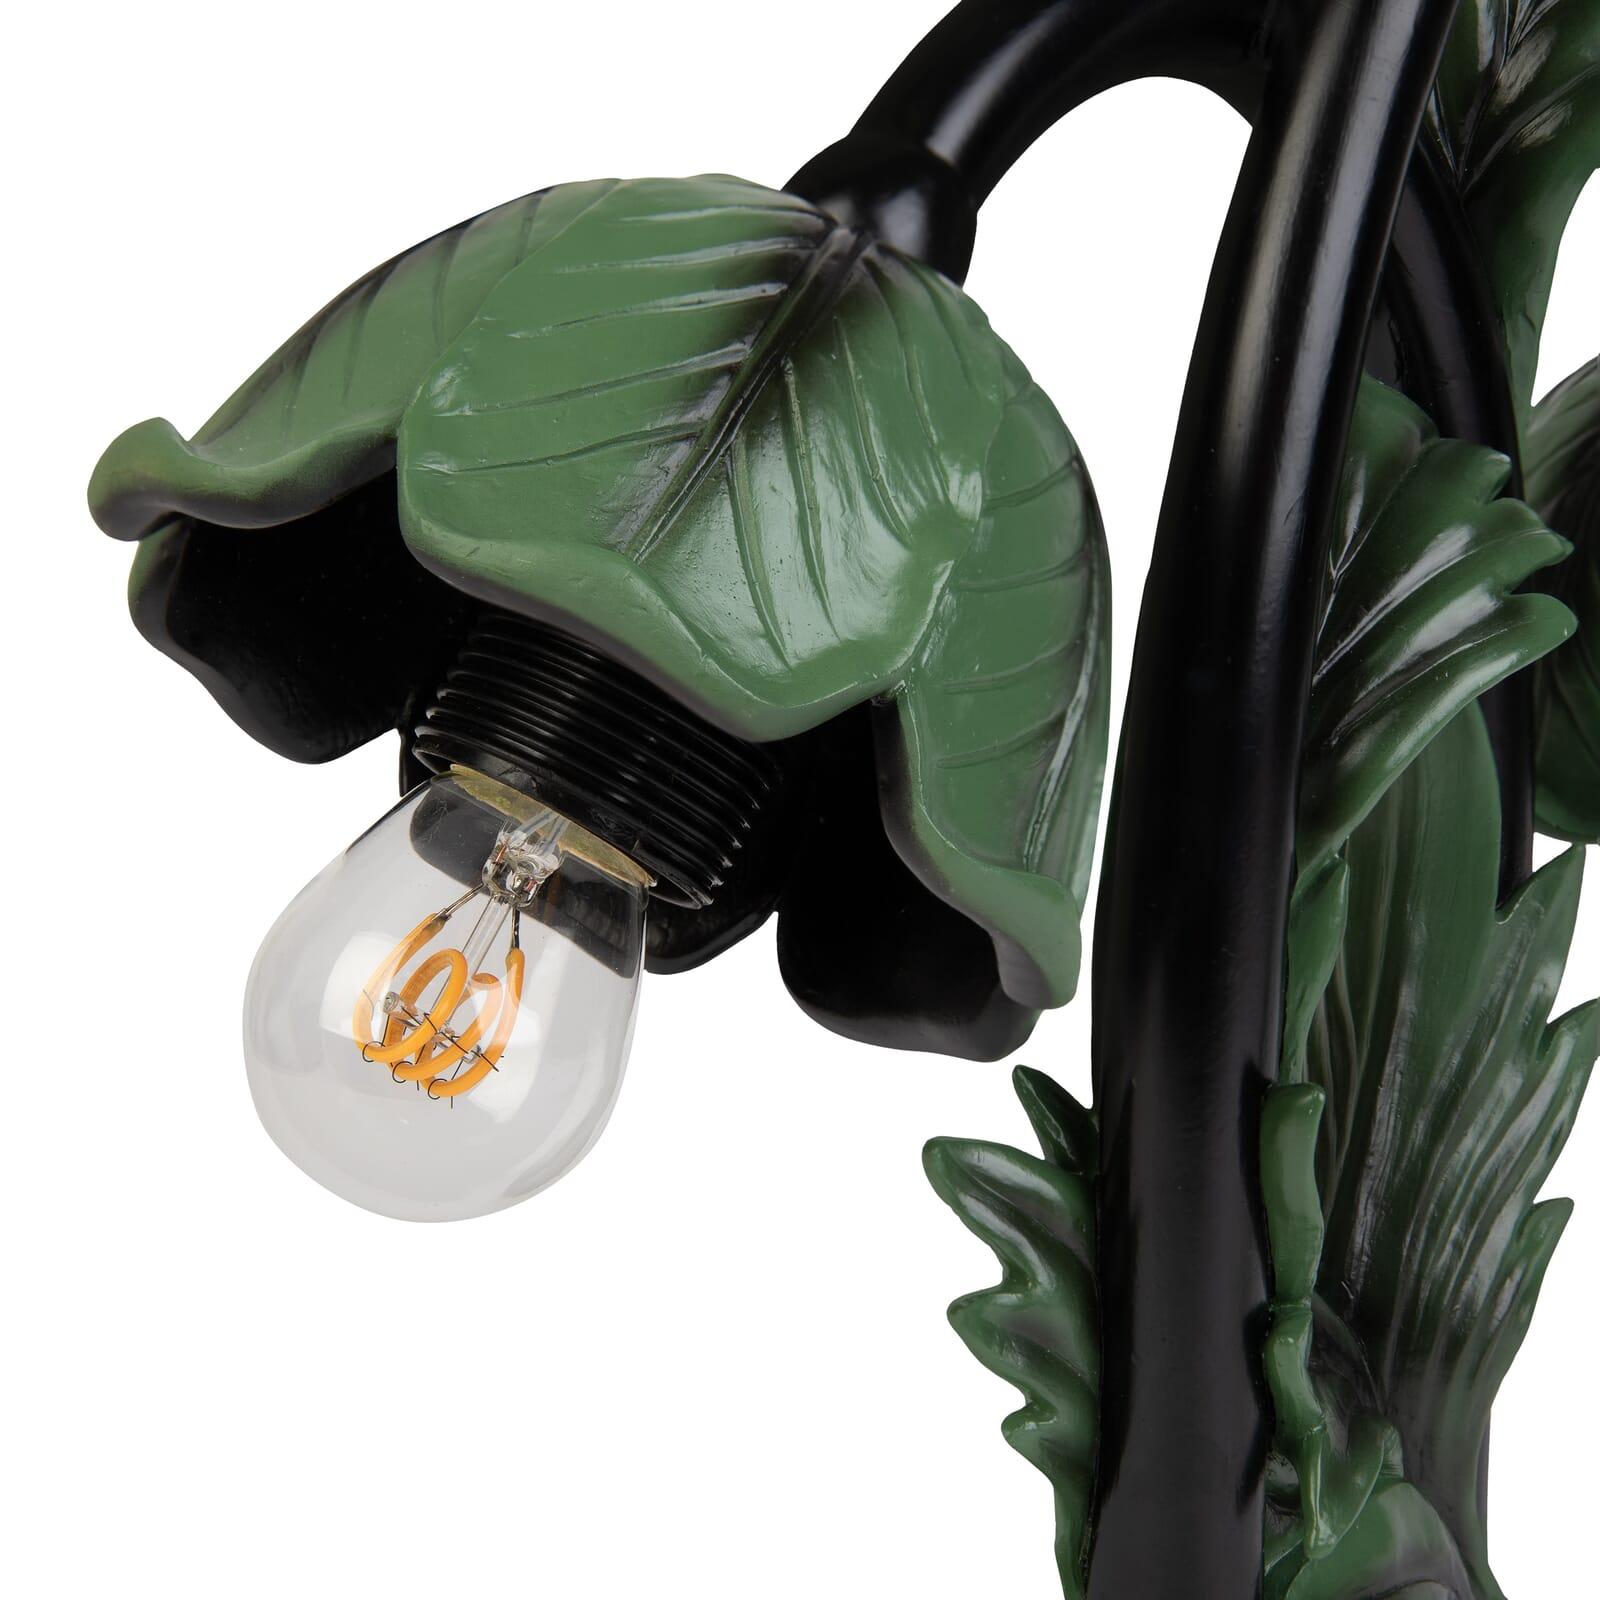 The symbol of enduring life and fine art, the acanthus flower gives its name to our Art Nouveau inspired lamp. Entwined with verdant leaves, this black and green piece brings the beauty of nature into the home.
